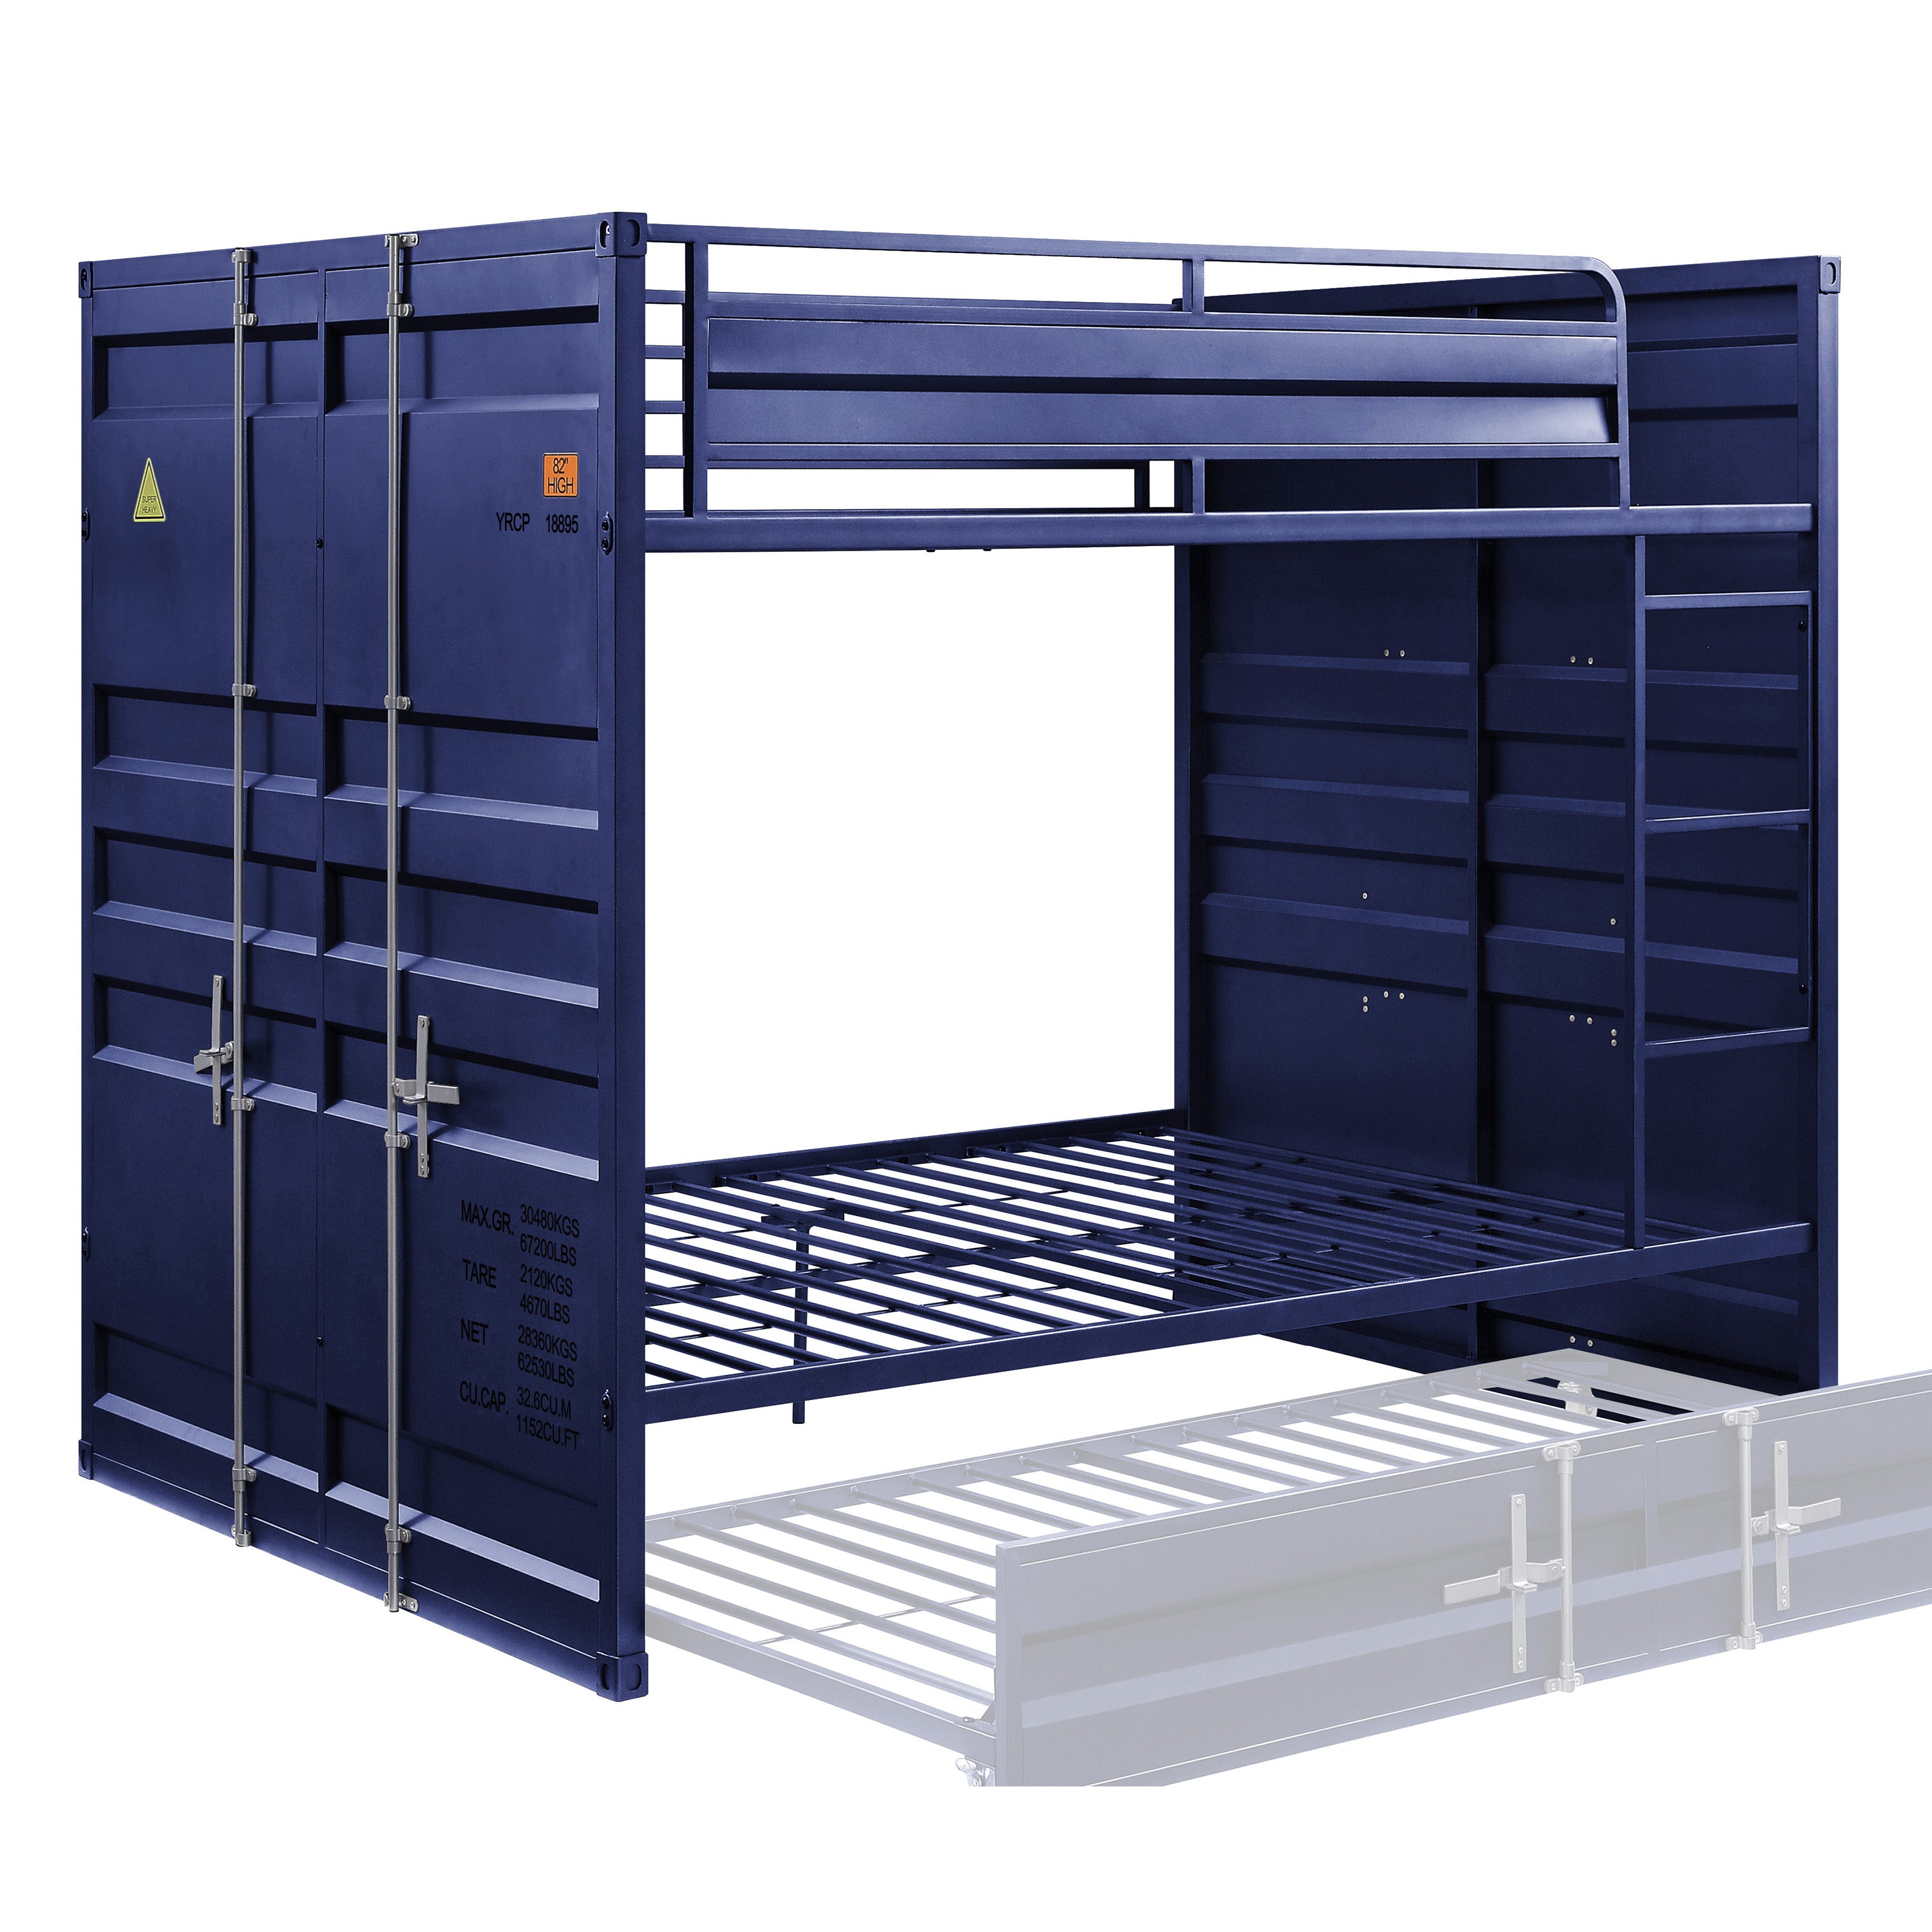 ACME Furniture Beds - Bunk Bed (Full/Full), Blue